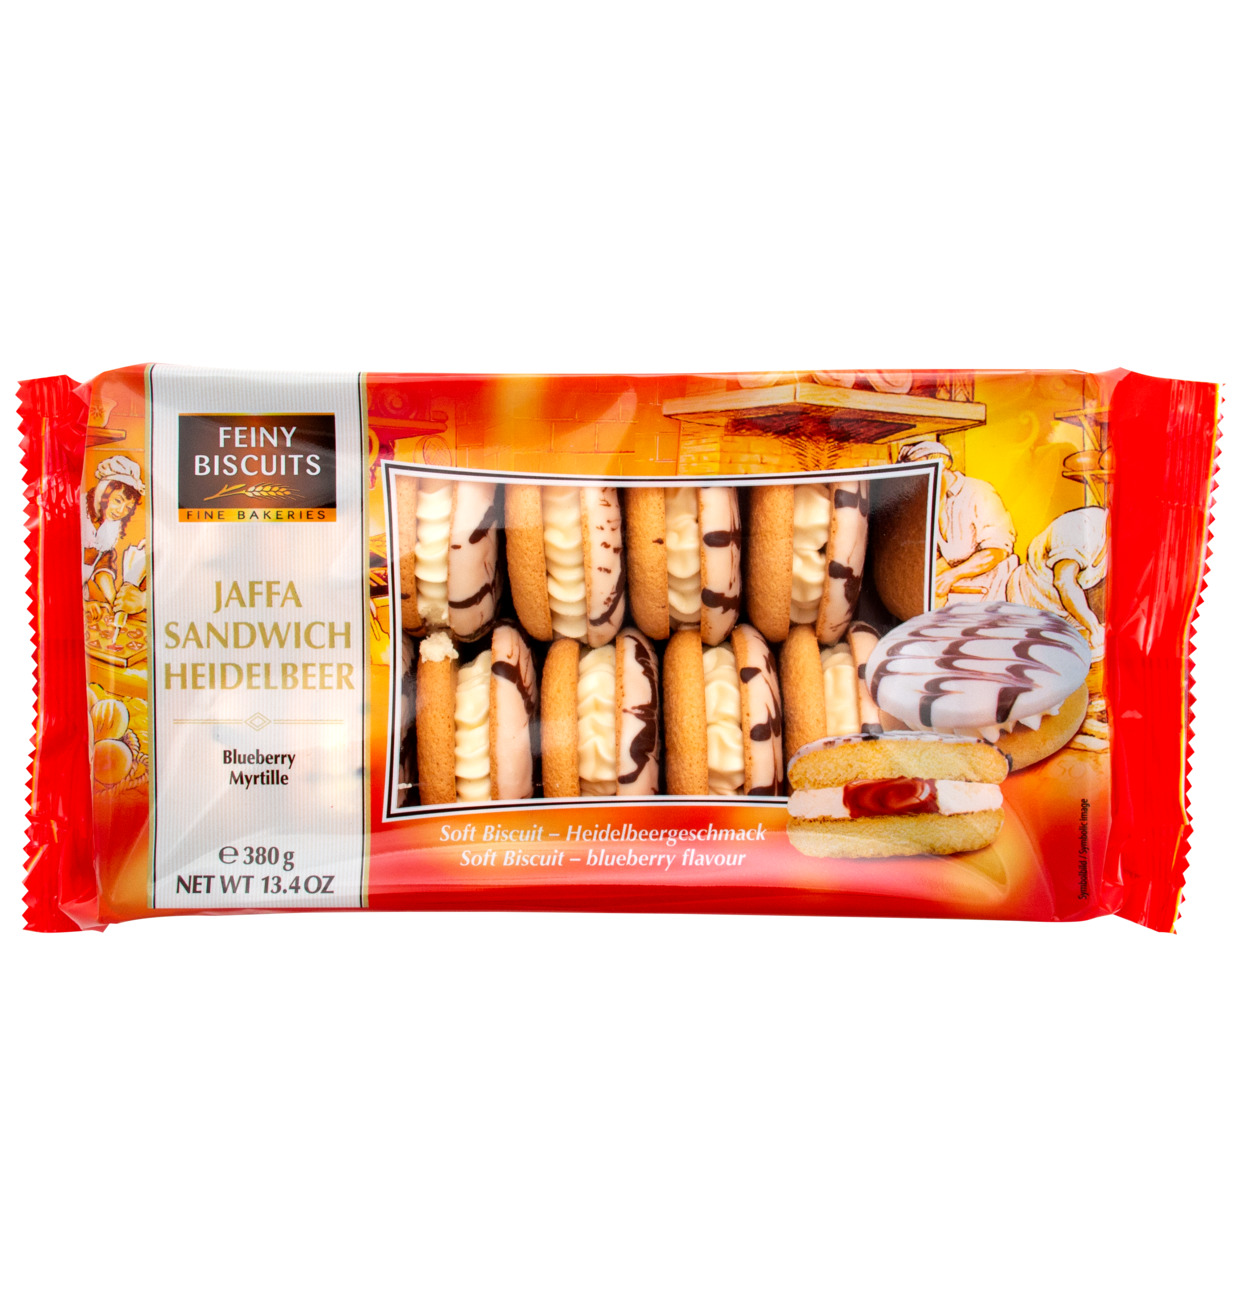 Feiny Biscuits &#1057;&#1101;&#1085;&#1076;&#1074;&#1080;&#1095; &#1071;&#1092;&#1092;&#1072; &#1089;&#1086; &#1089;&#1083;&#1080;&#1074;&#1082;&#1072;&#1084;&#1080; &#1080; &#1095;&#1077;&#1088;&#1085;&#1080;&#1082;&#1086;&#1081; 380&#1075;&#1088;.